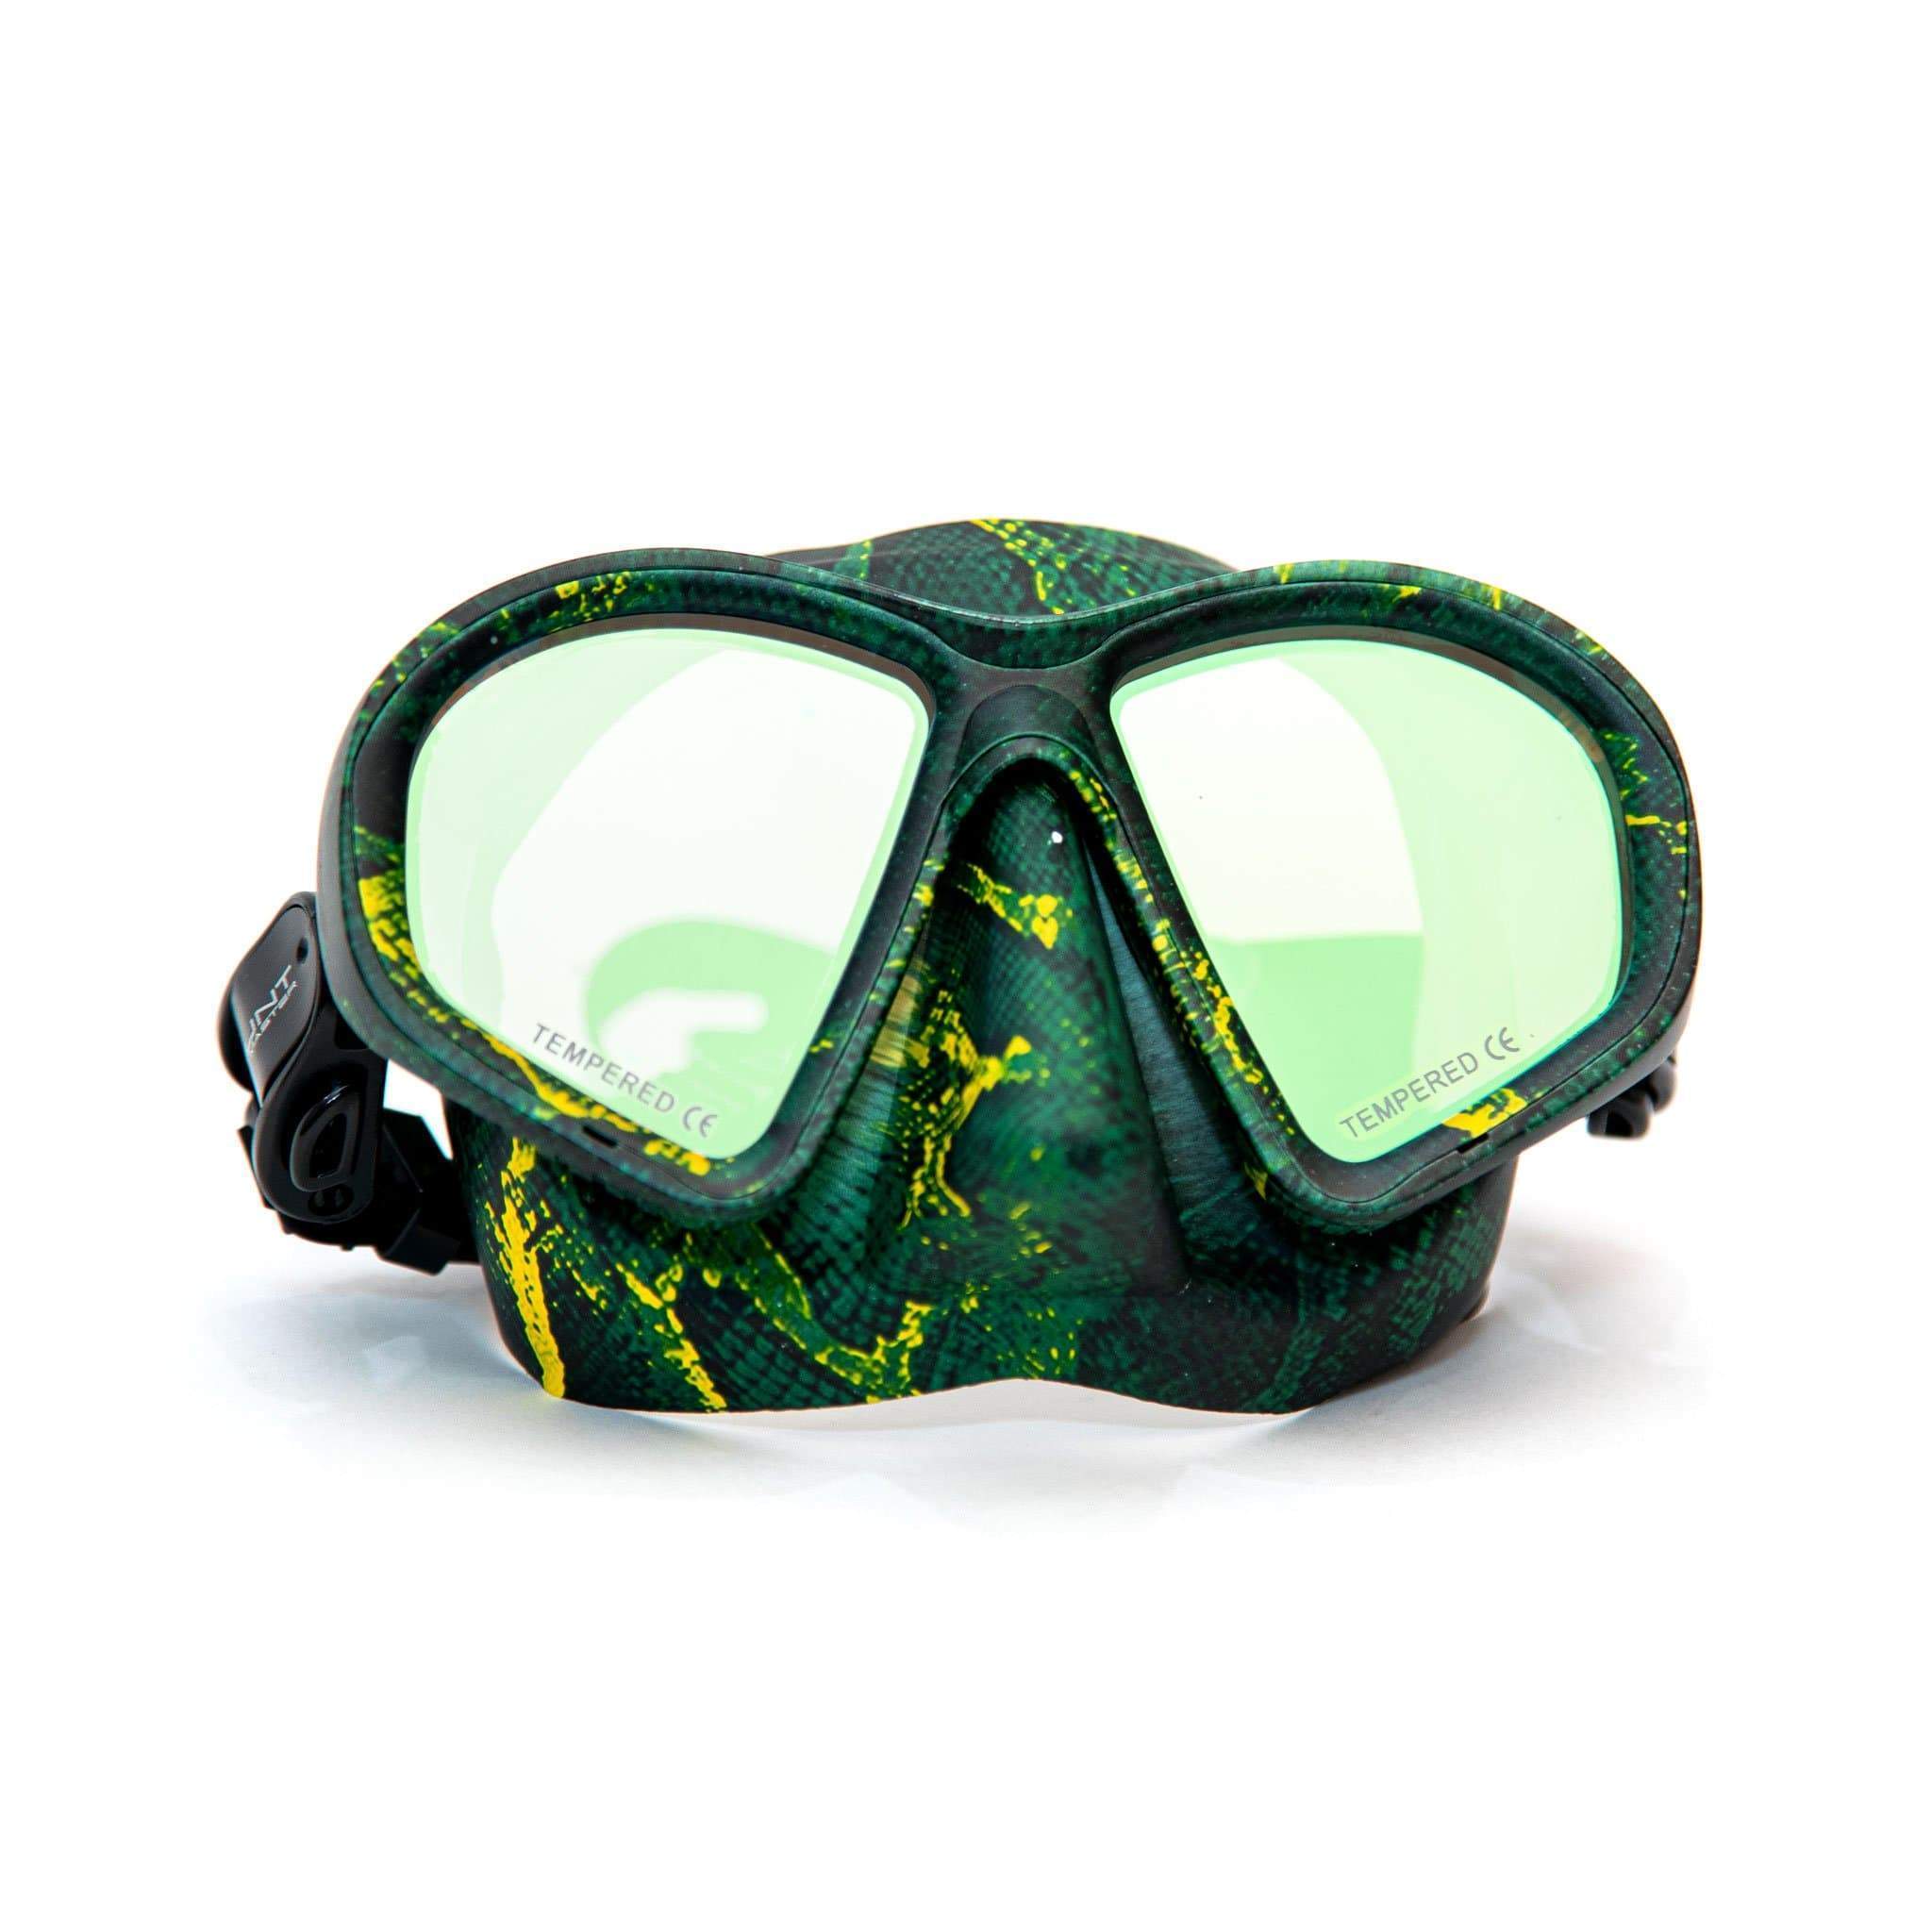 HuntMaster Green Harbinger Camo Diving Mask- With Matching Camo Container (Green)